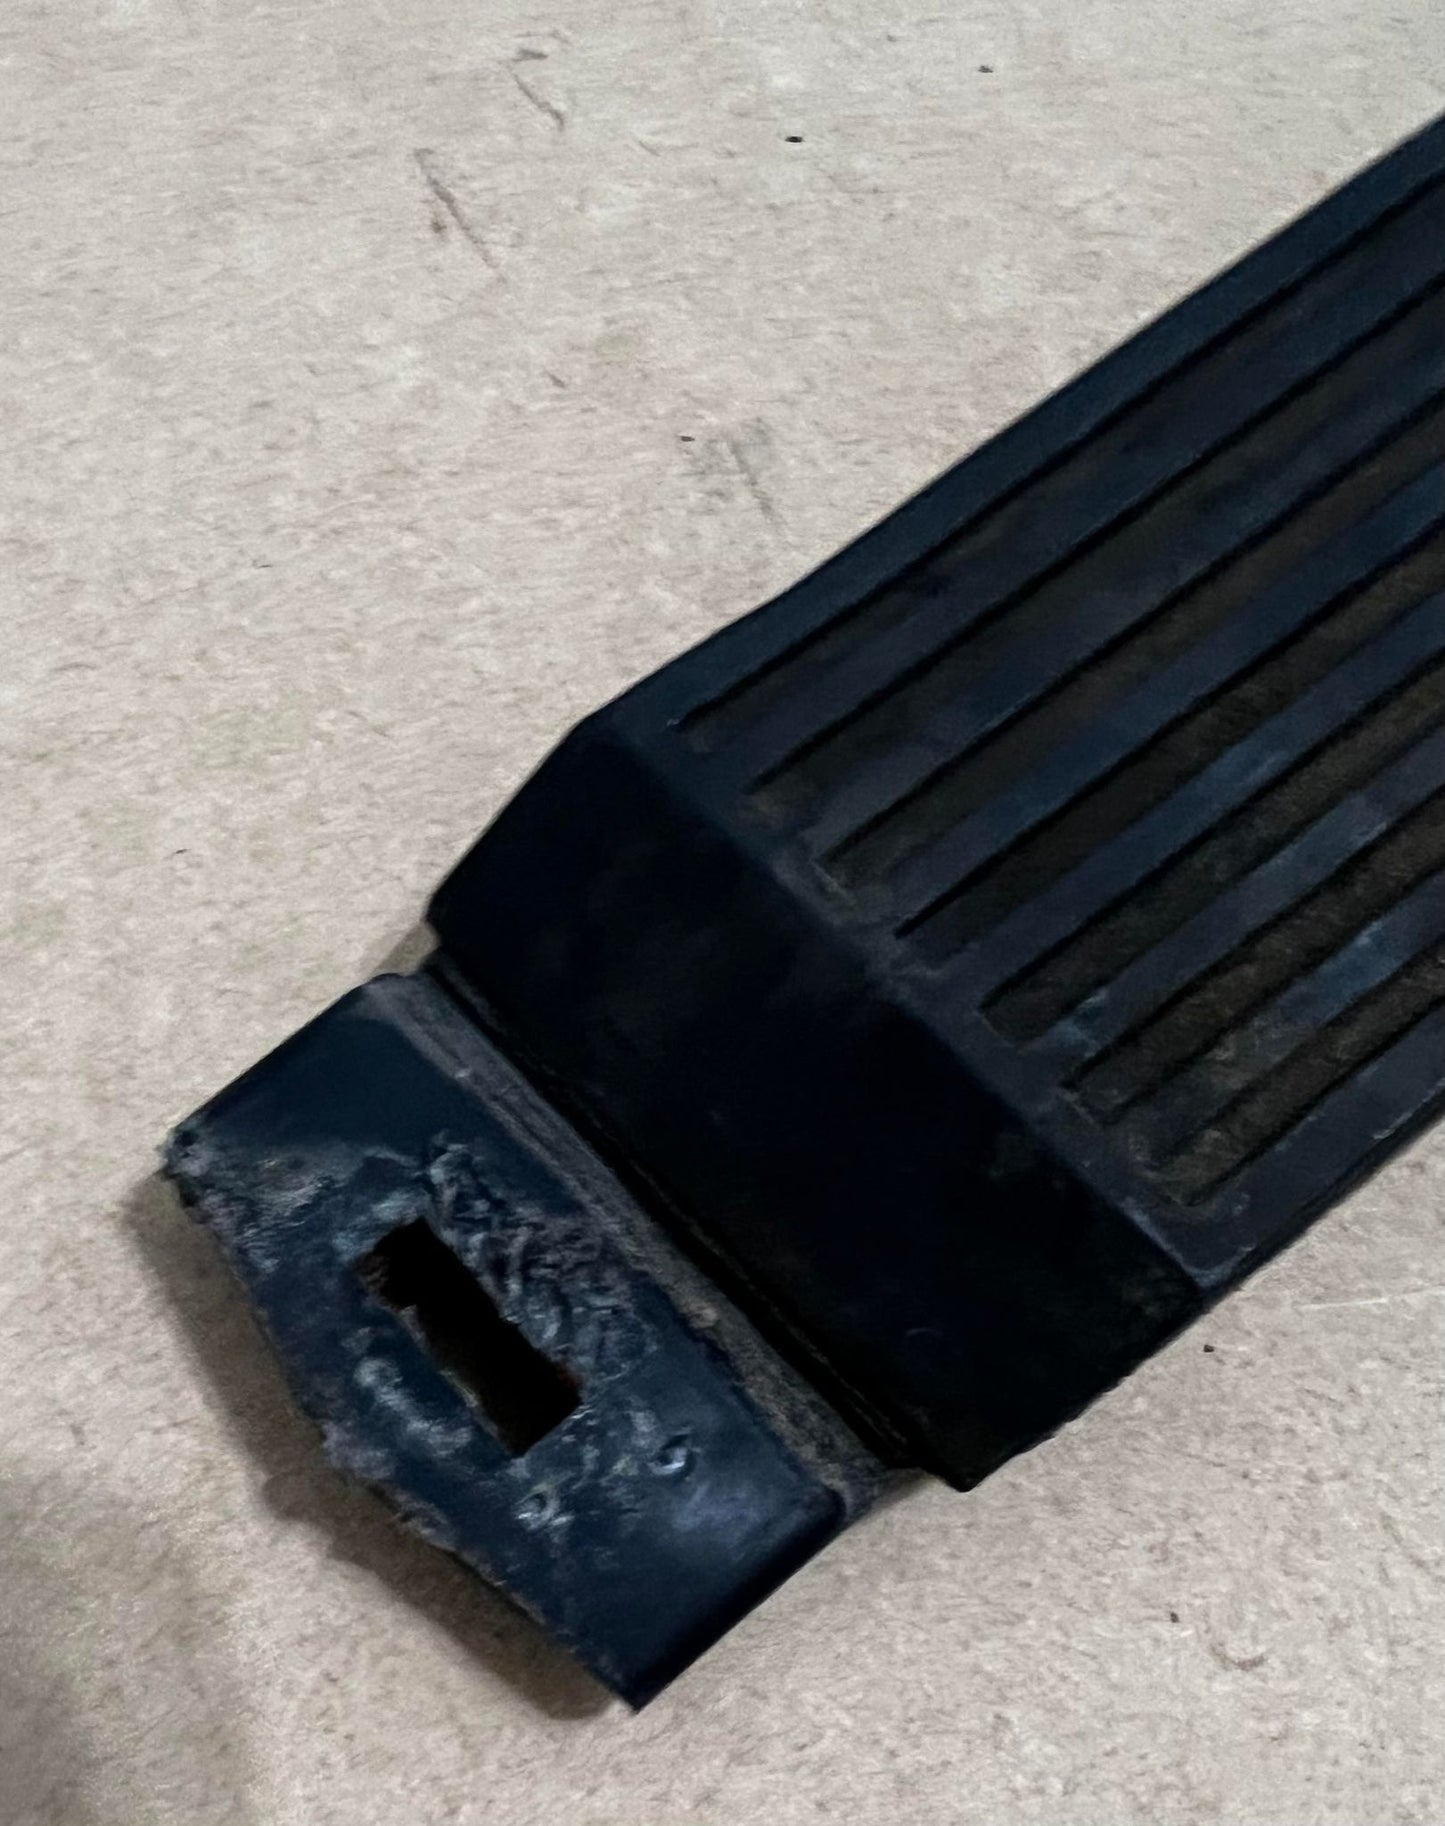 Used Mercedes-Benz W116 W123 R107 accelerator/gas pedal